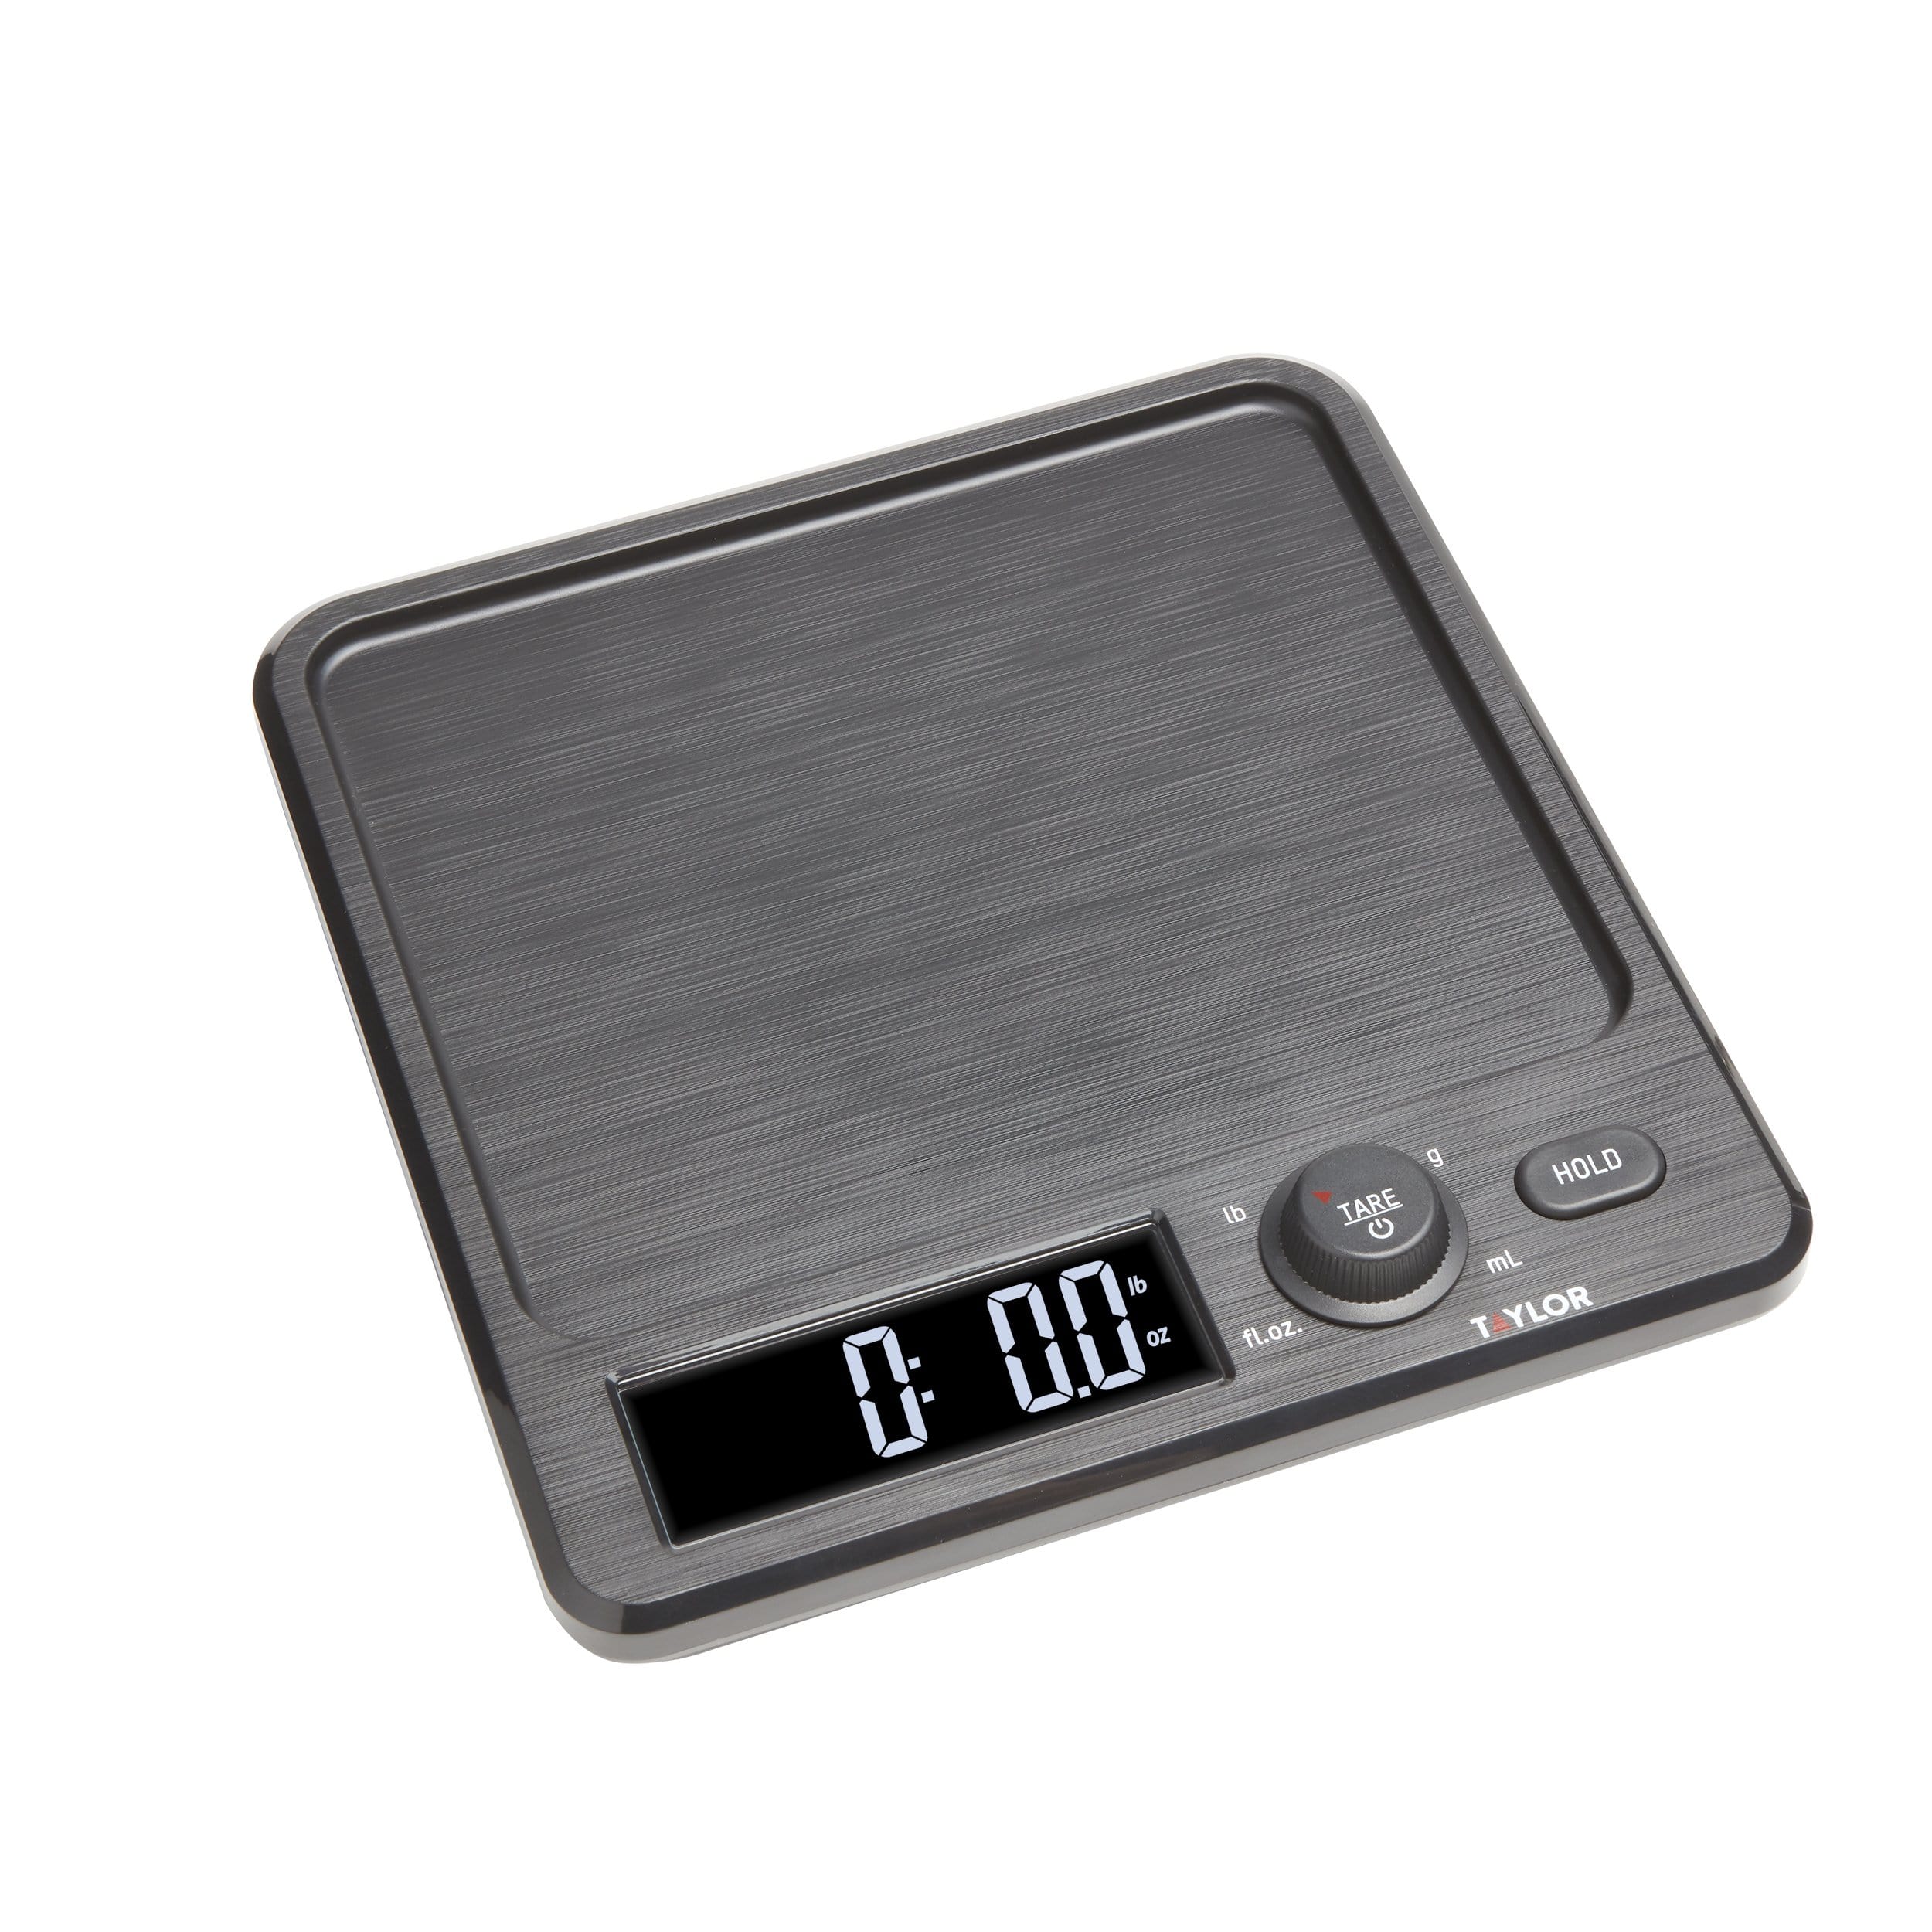 22lb Kitchen Scale with Stainless Steel Storage Container & Lid